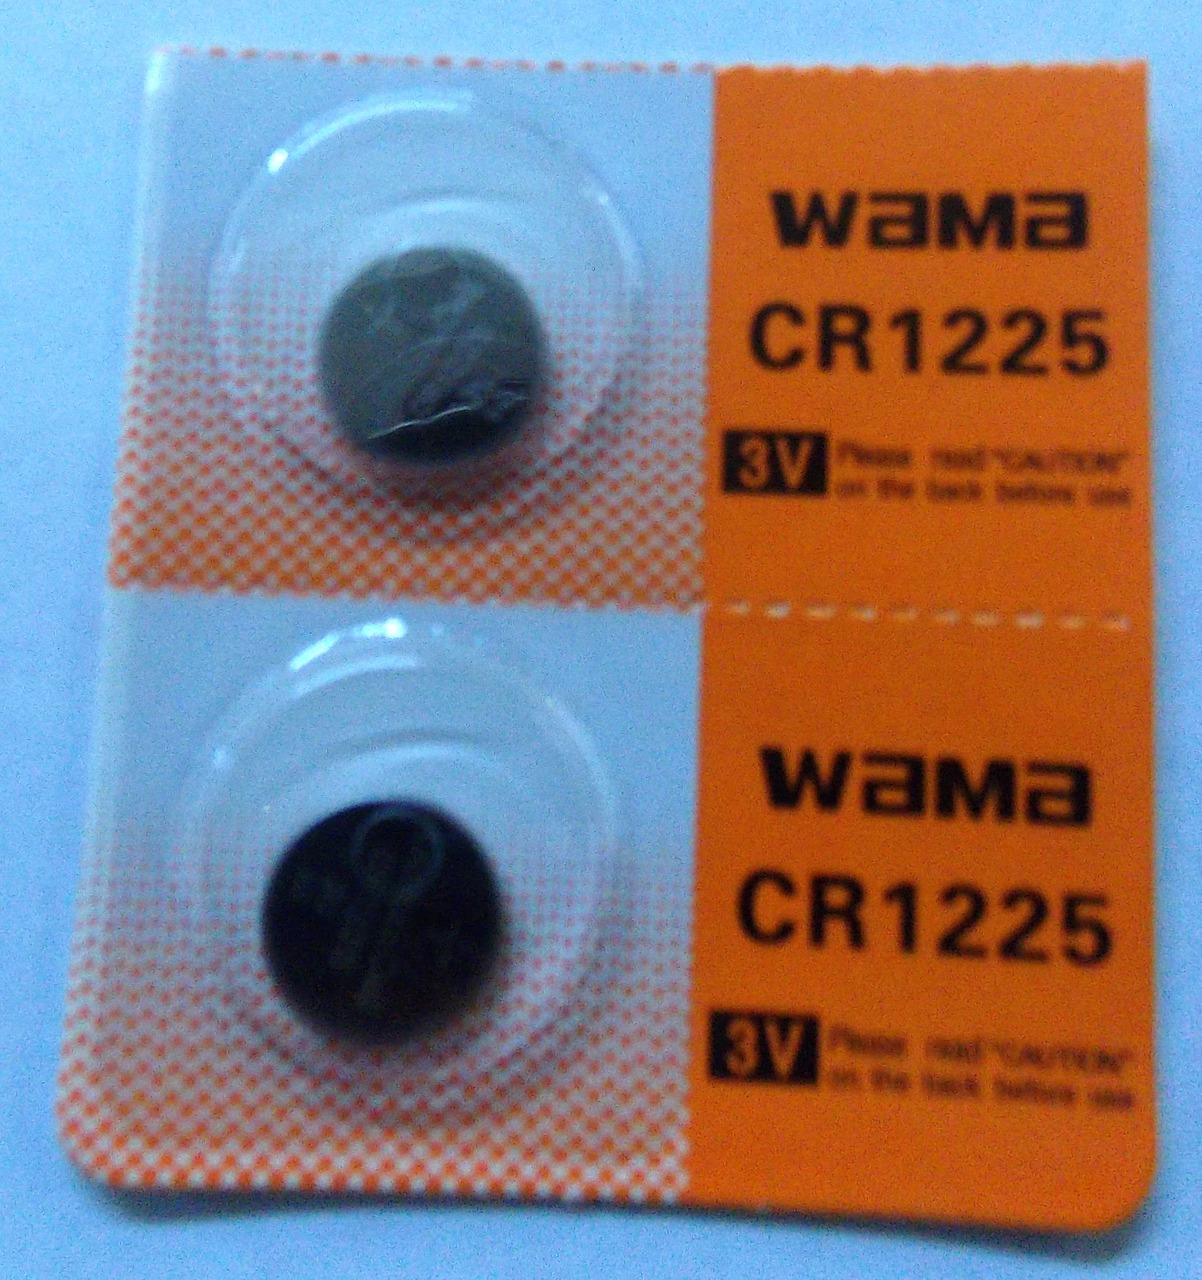 BBW CR1225 3V Lithium Coin Battery - 2 Pack + FREE SHIPPING!